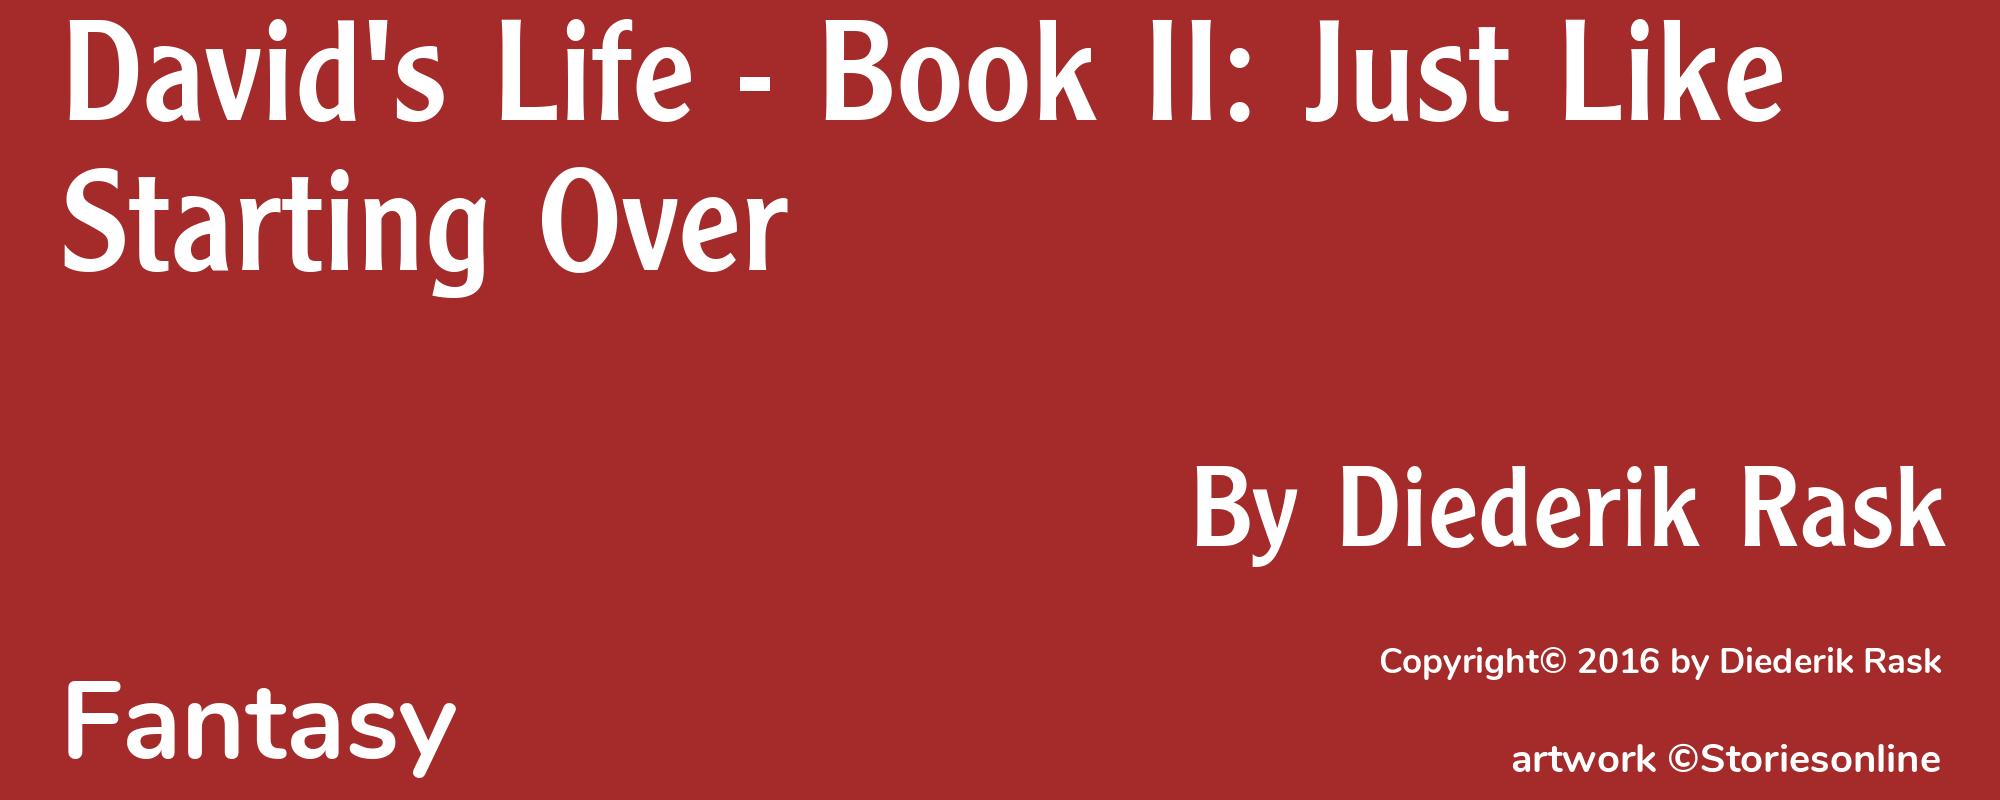 David's Life - Book II: Just Like Starting Over - Cover